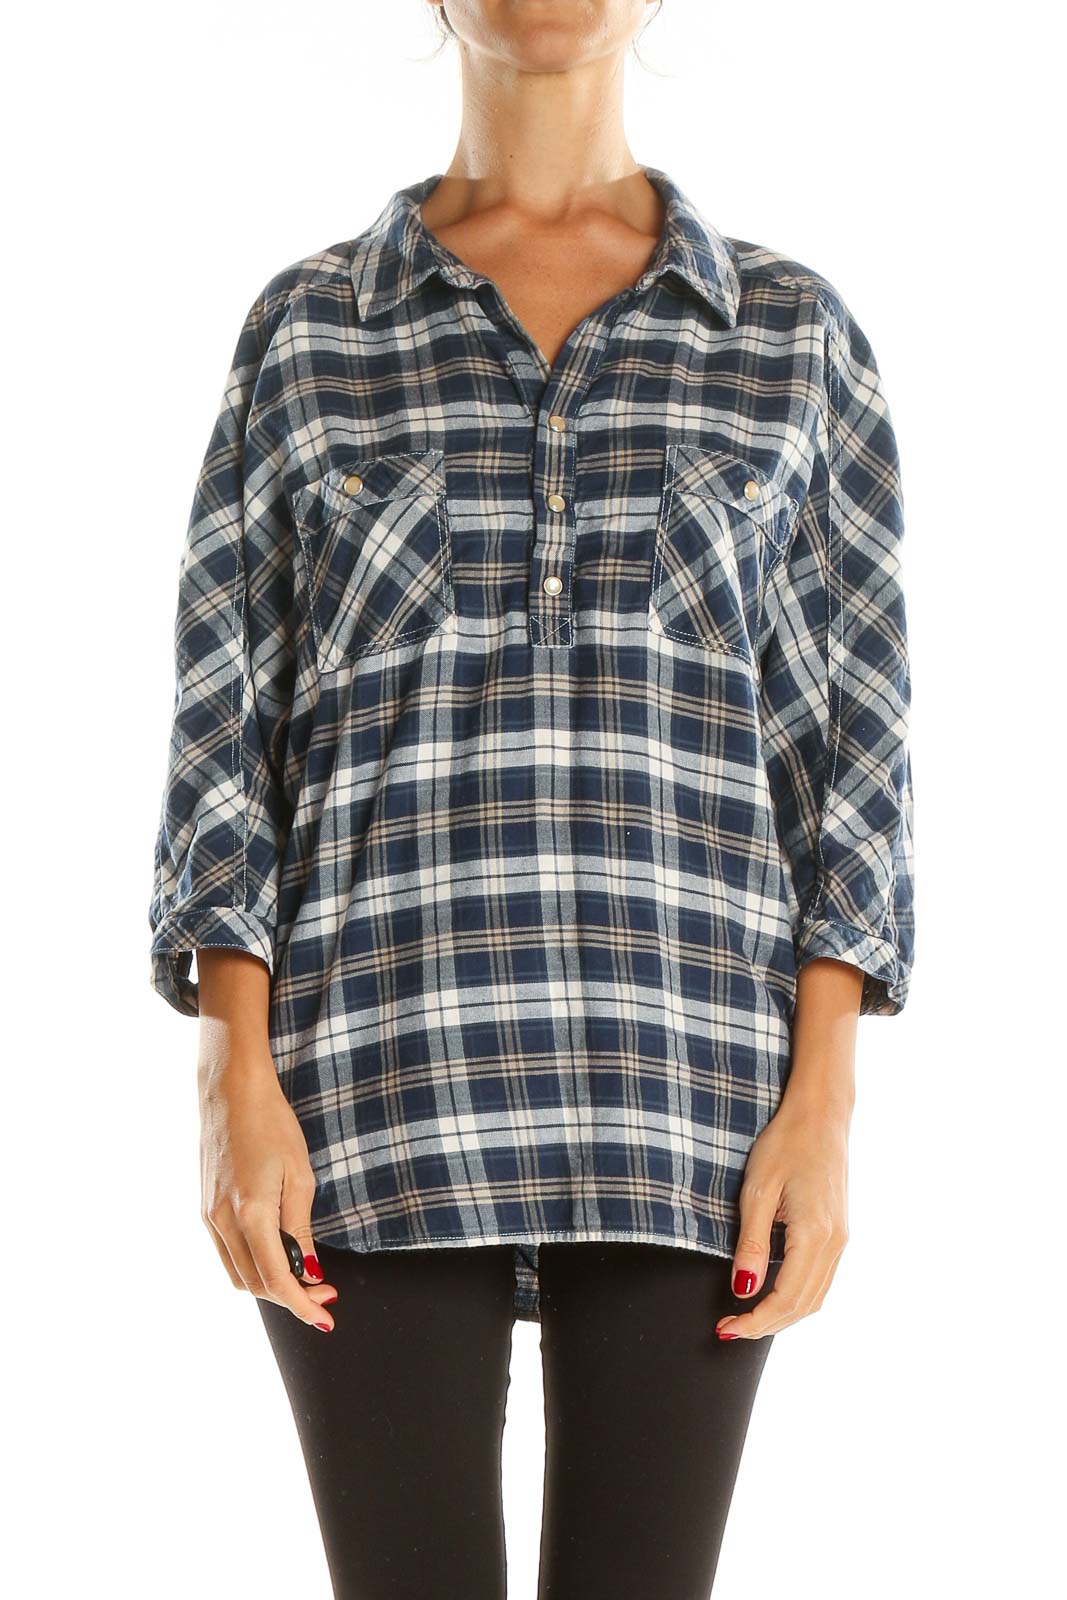 Blue Checkered All Day Wear Flannel Top Front